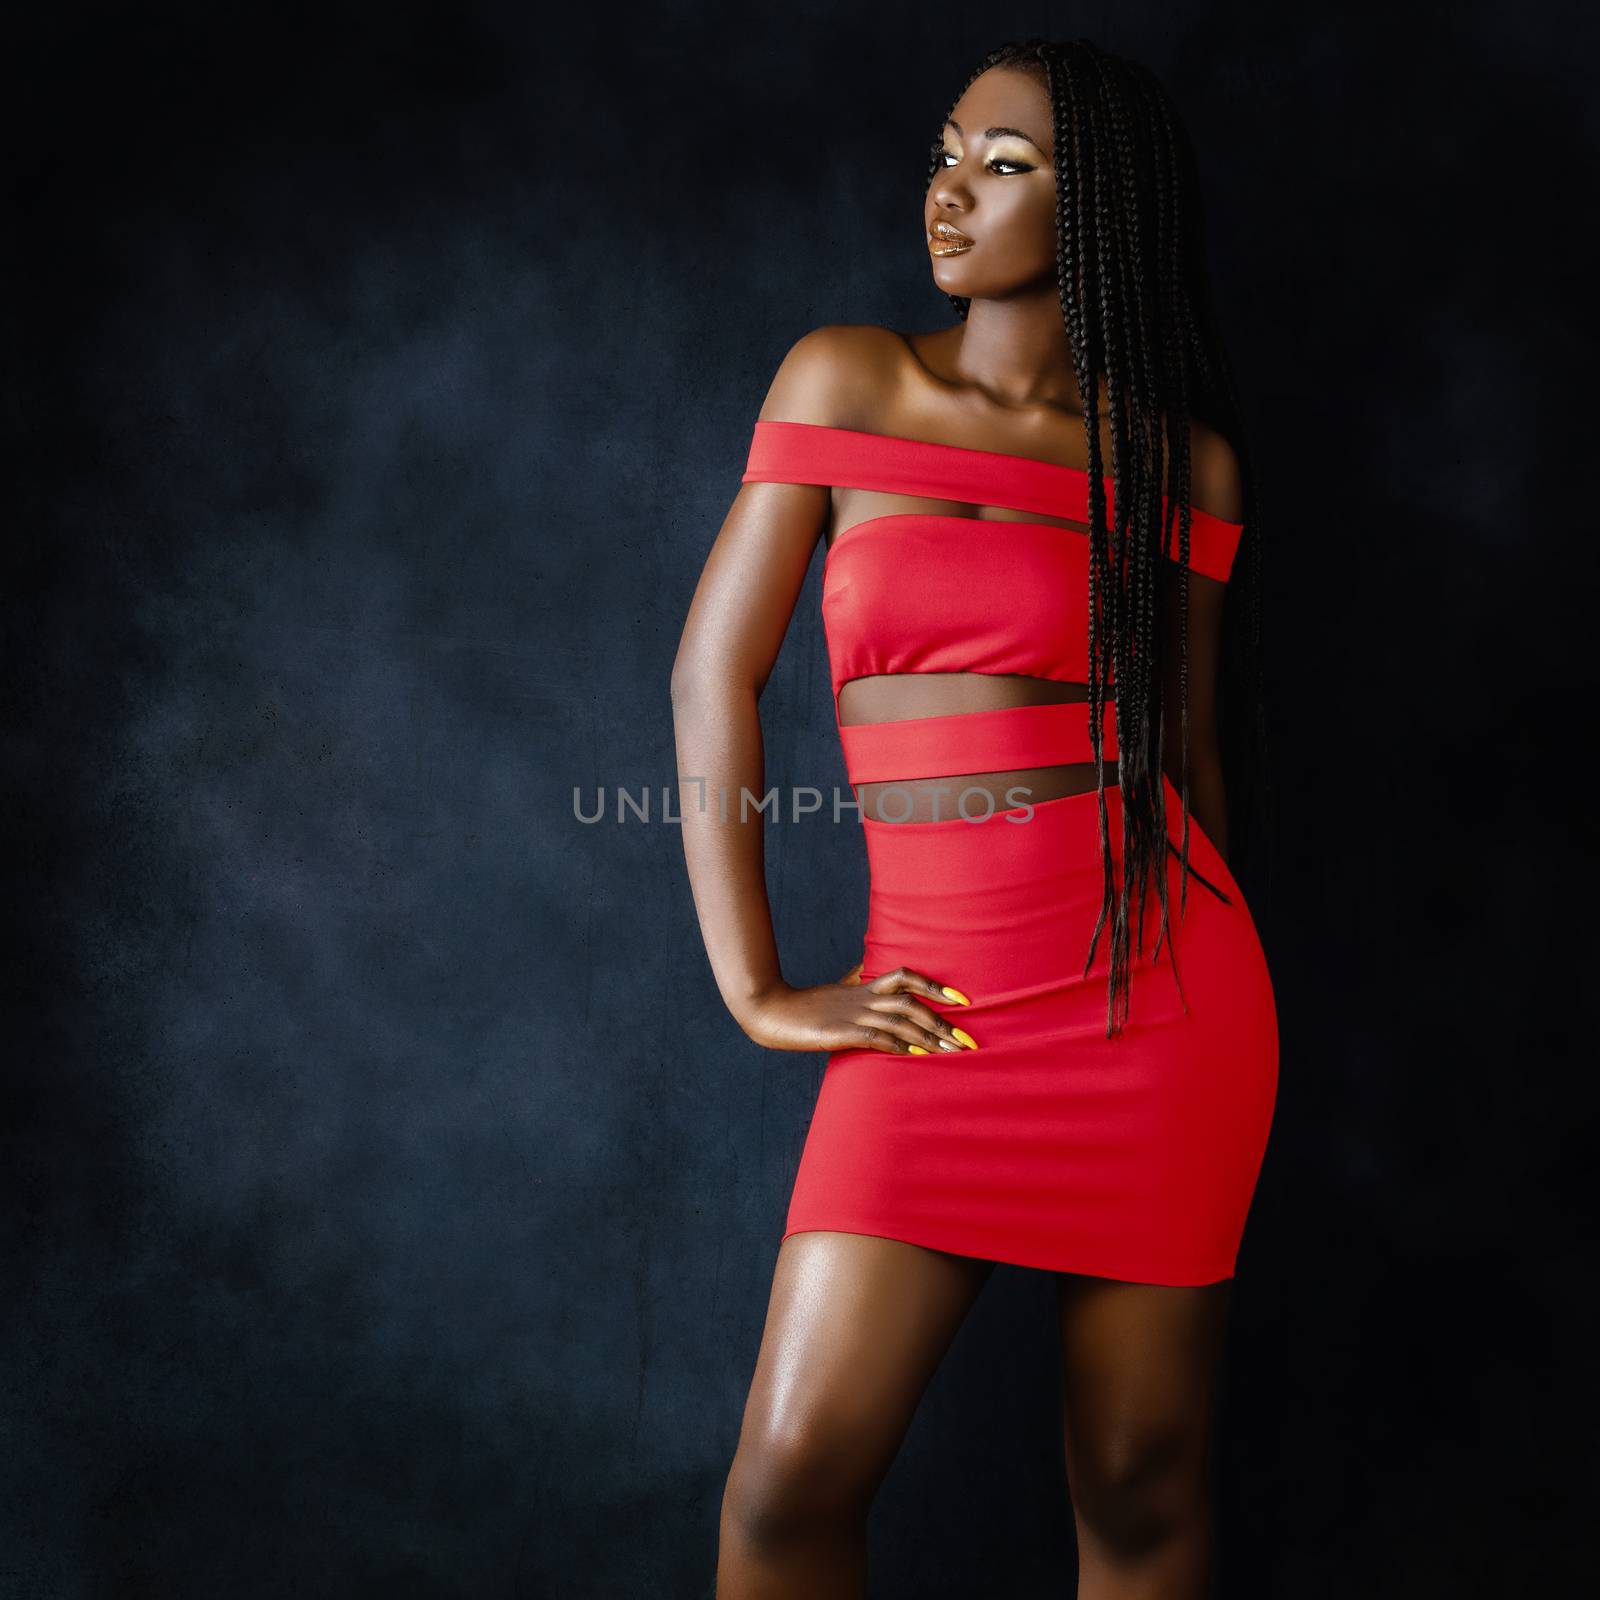 Close up portrait of sensual young african woman in red dress.Studio shot of girl  with long braided hair against fringe background.